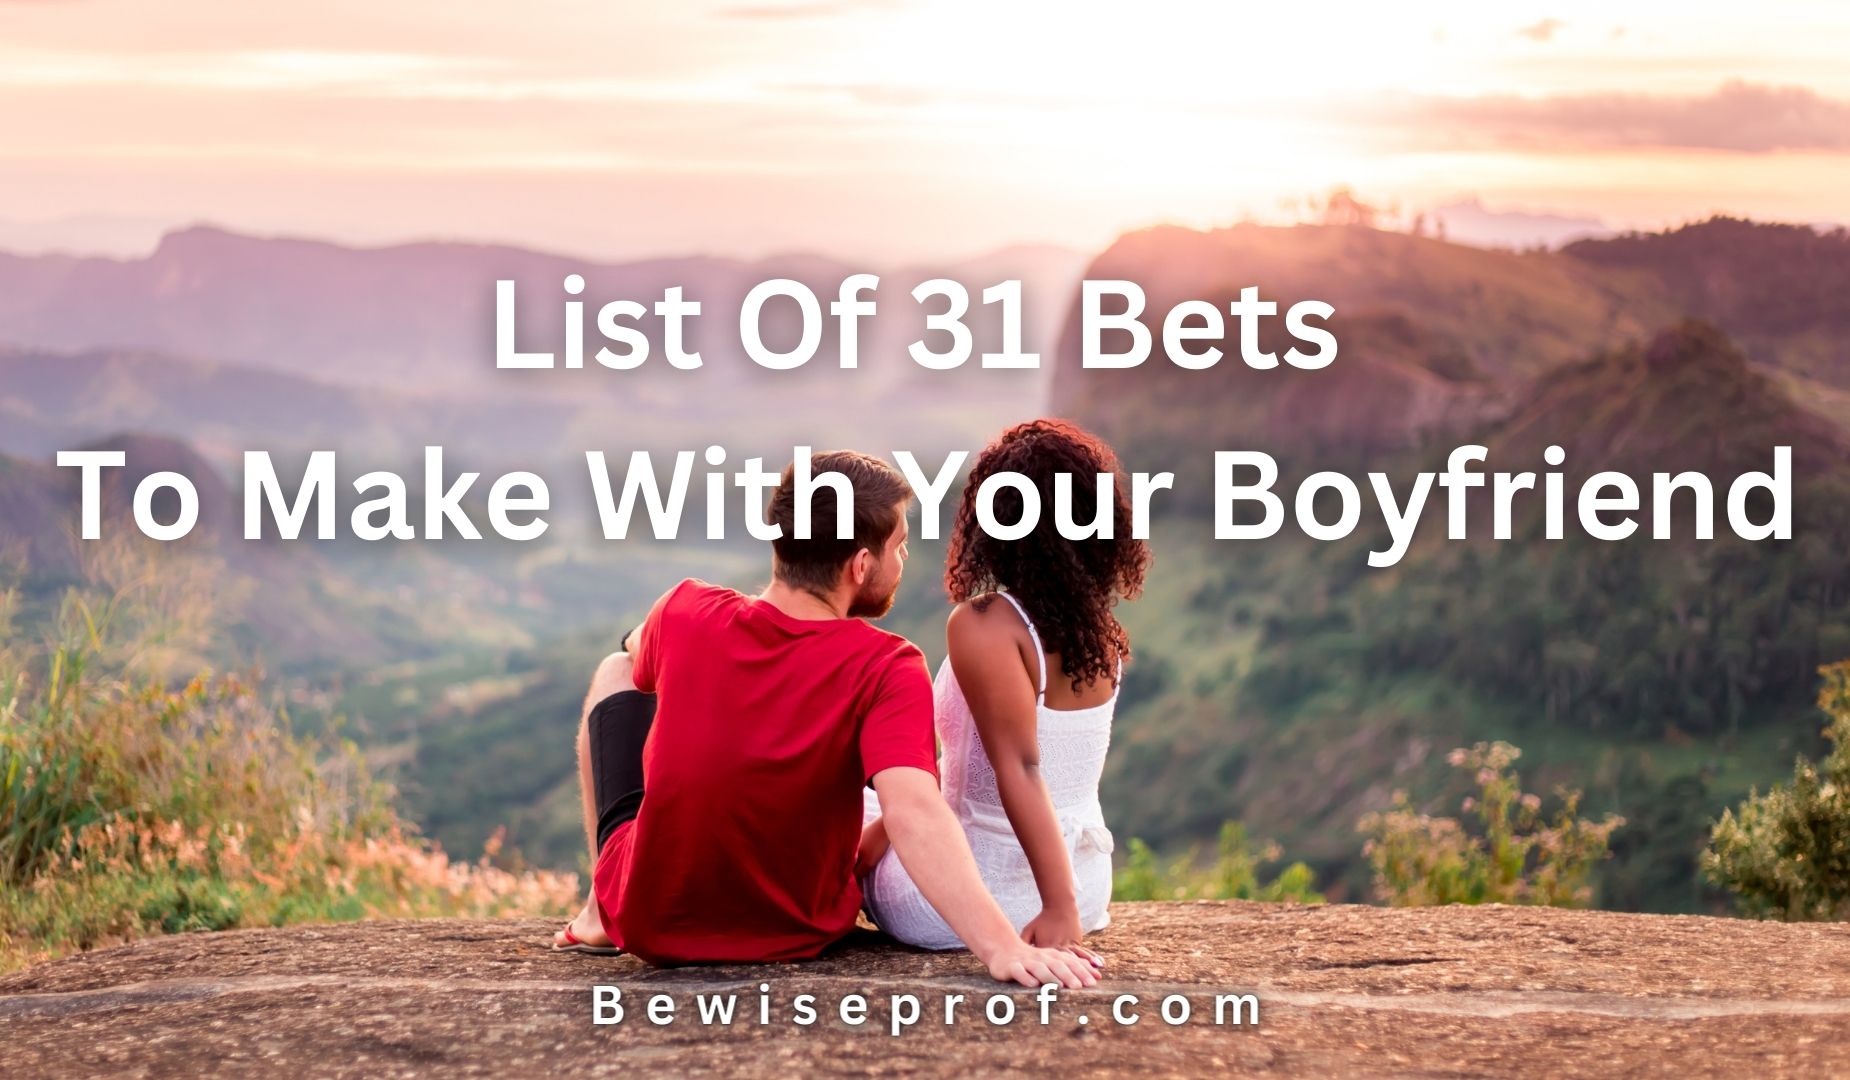 List Of 31 Bets To Make With Your Boyfriend